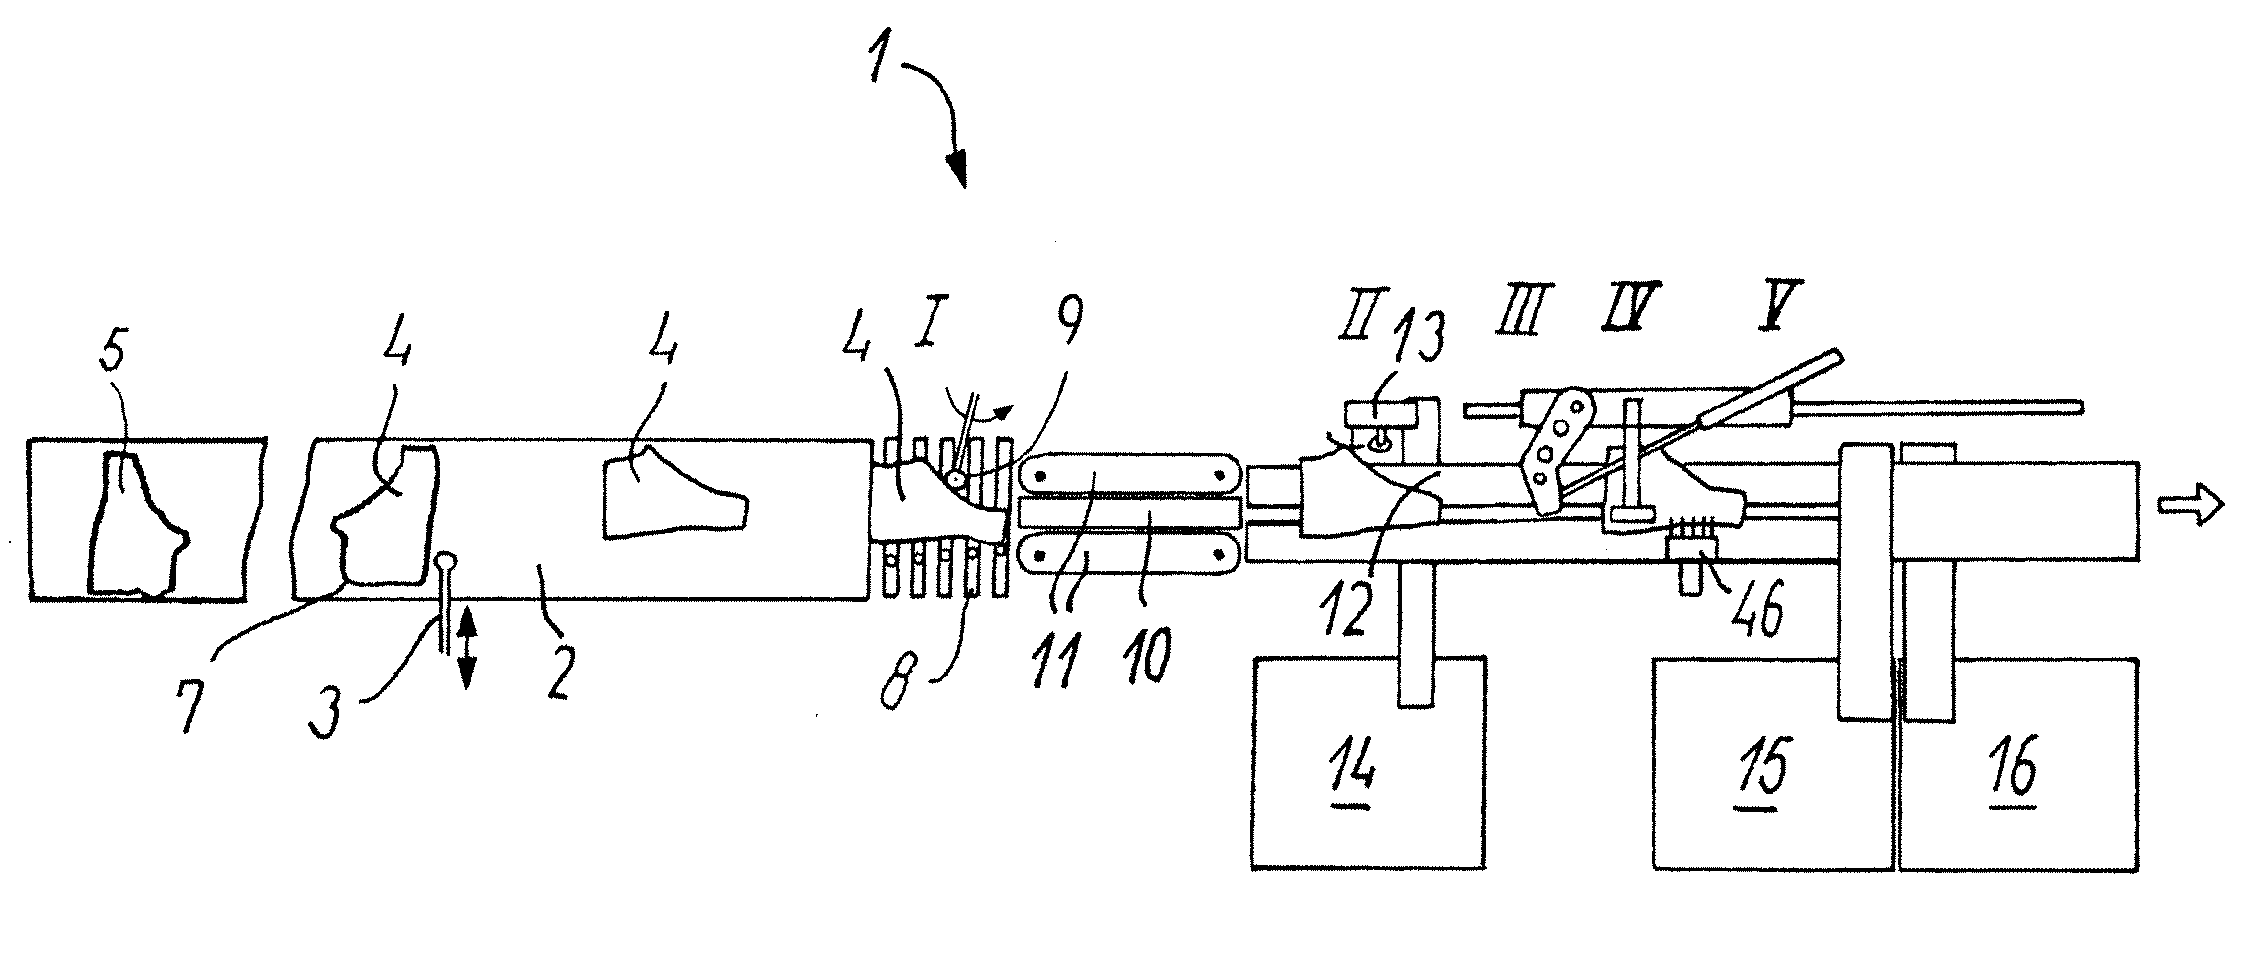 Method for automatic cutting of hams, and an apparatus for automatic cutting of hams